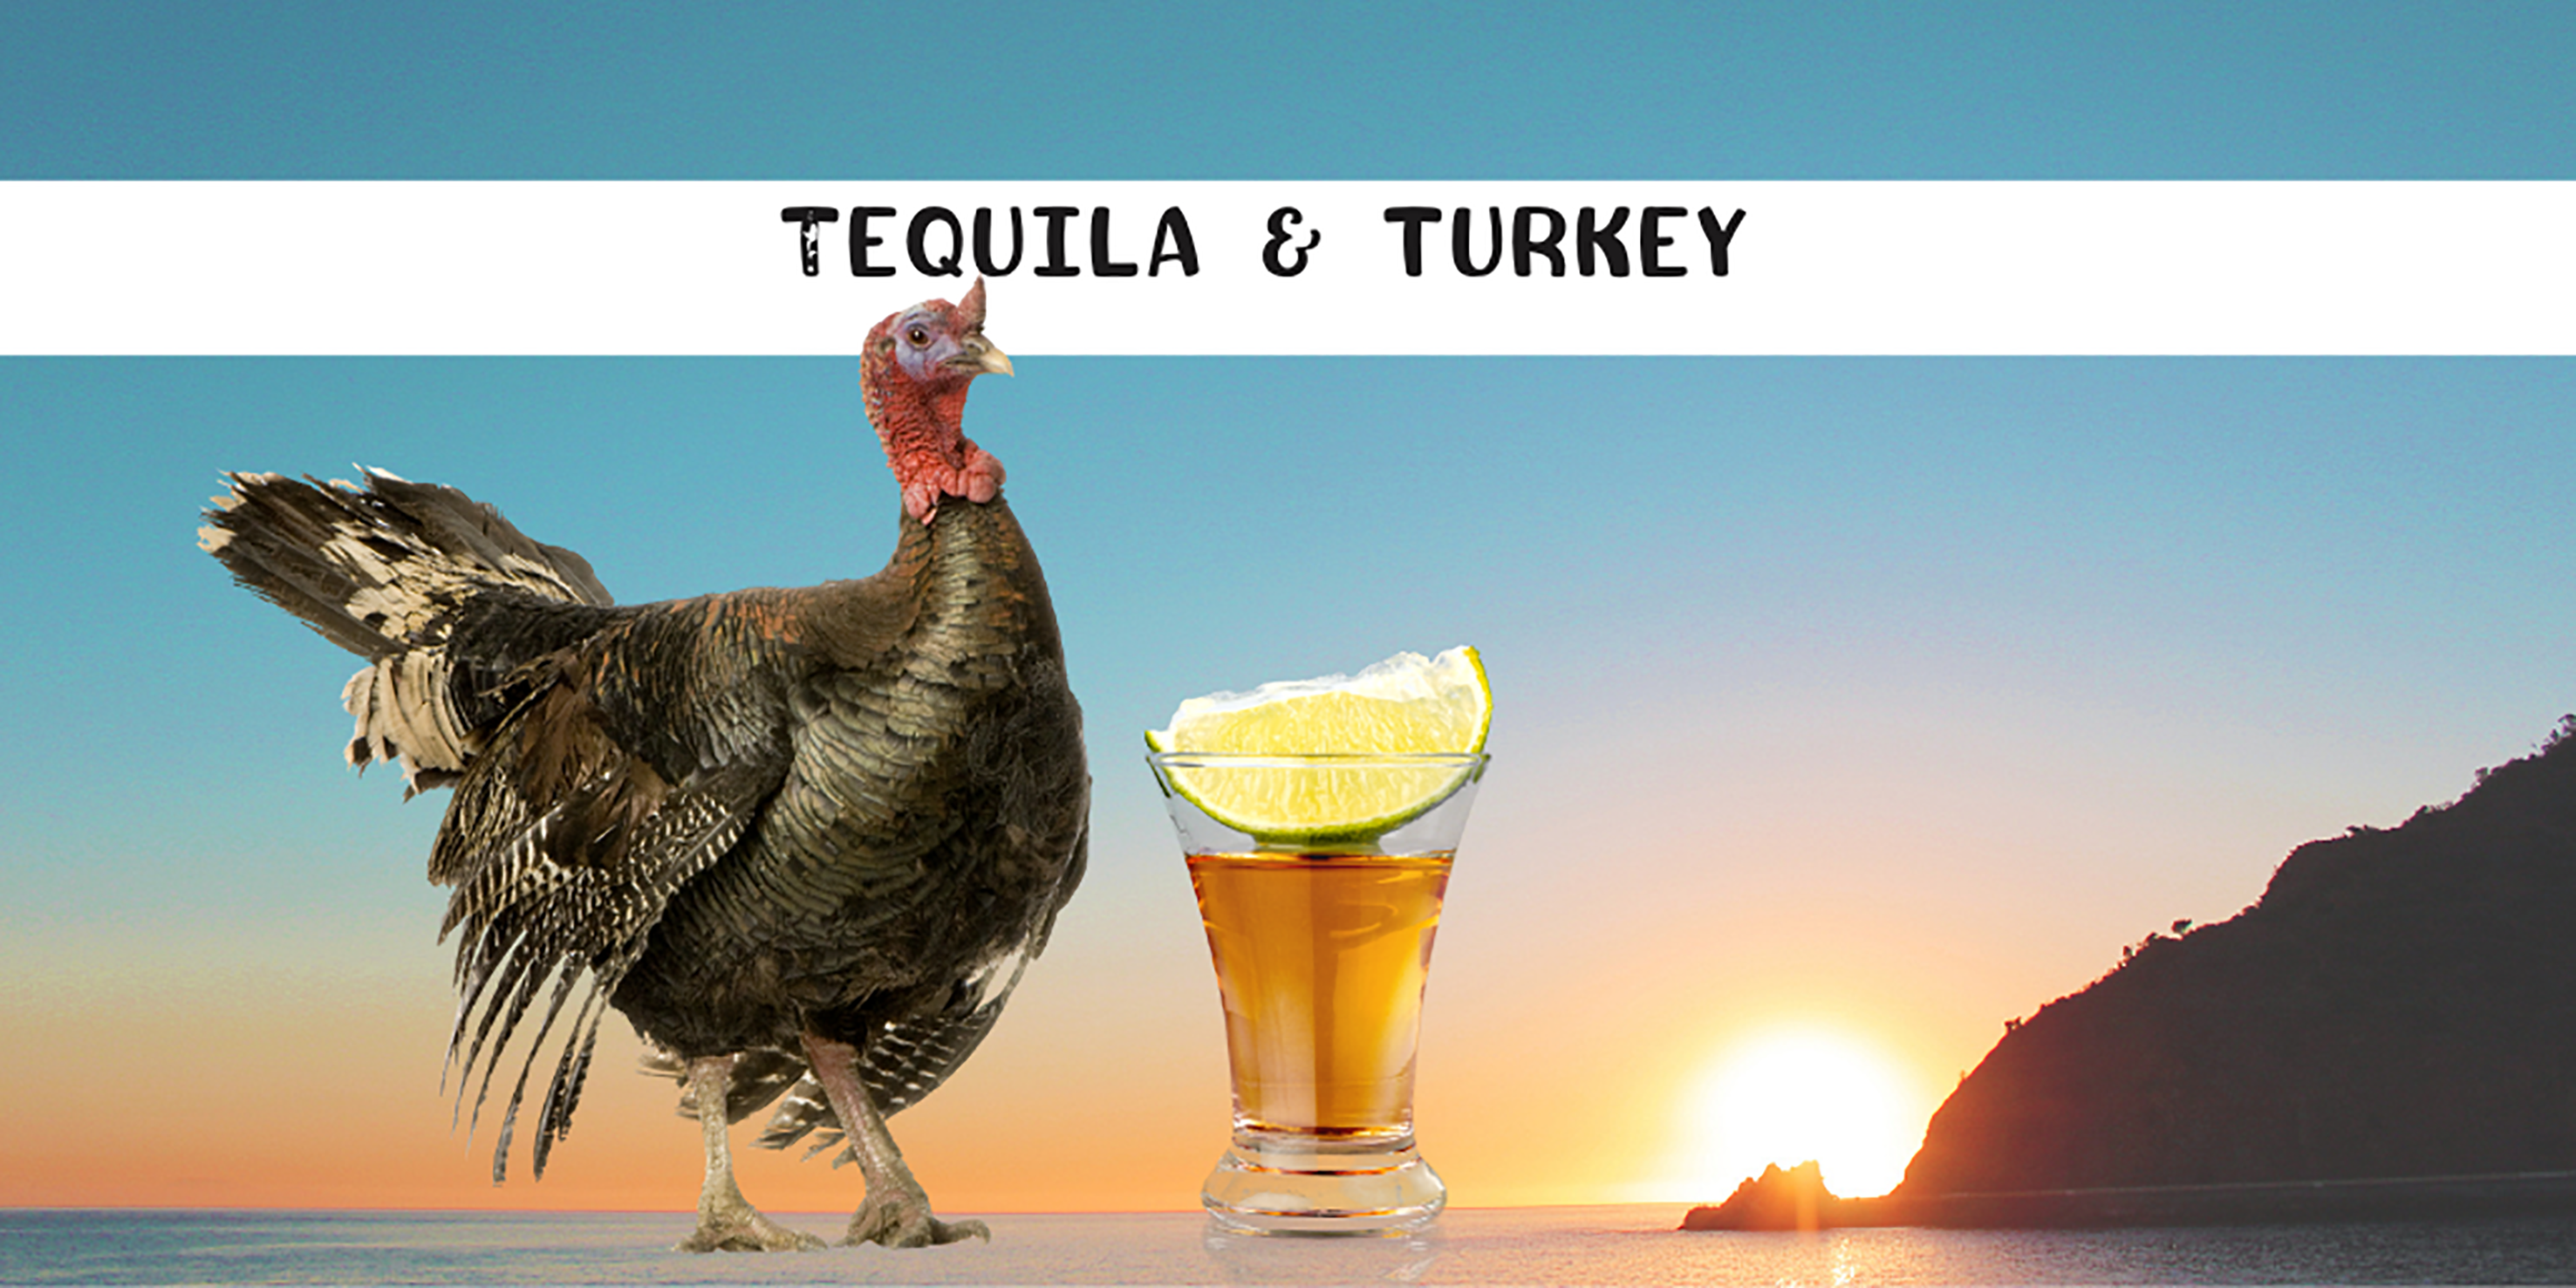 Turkey and Tequila